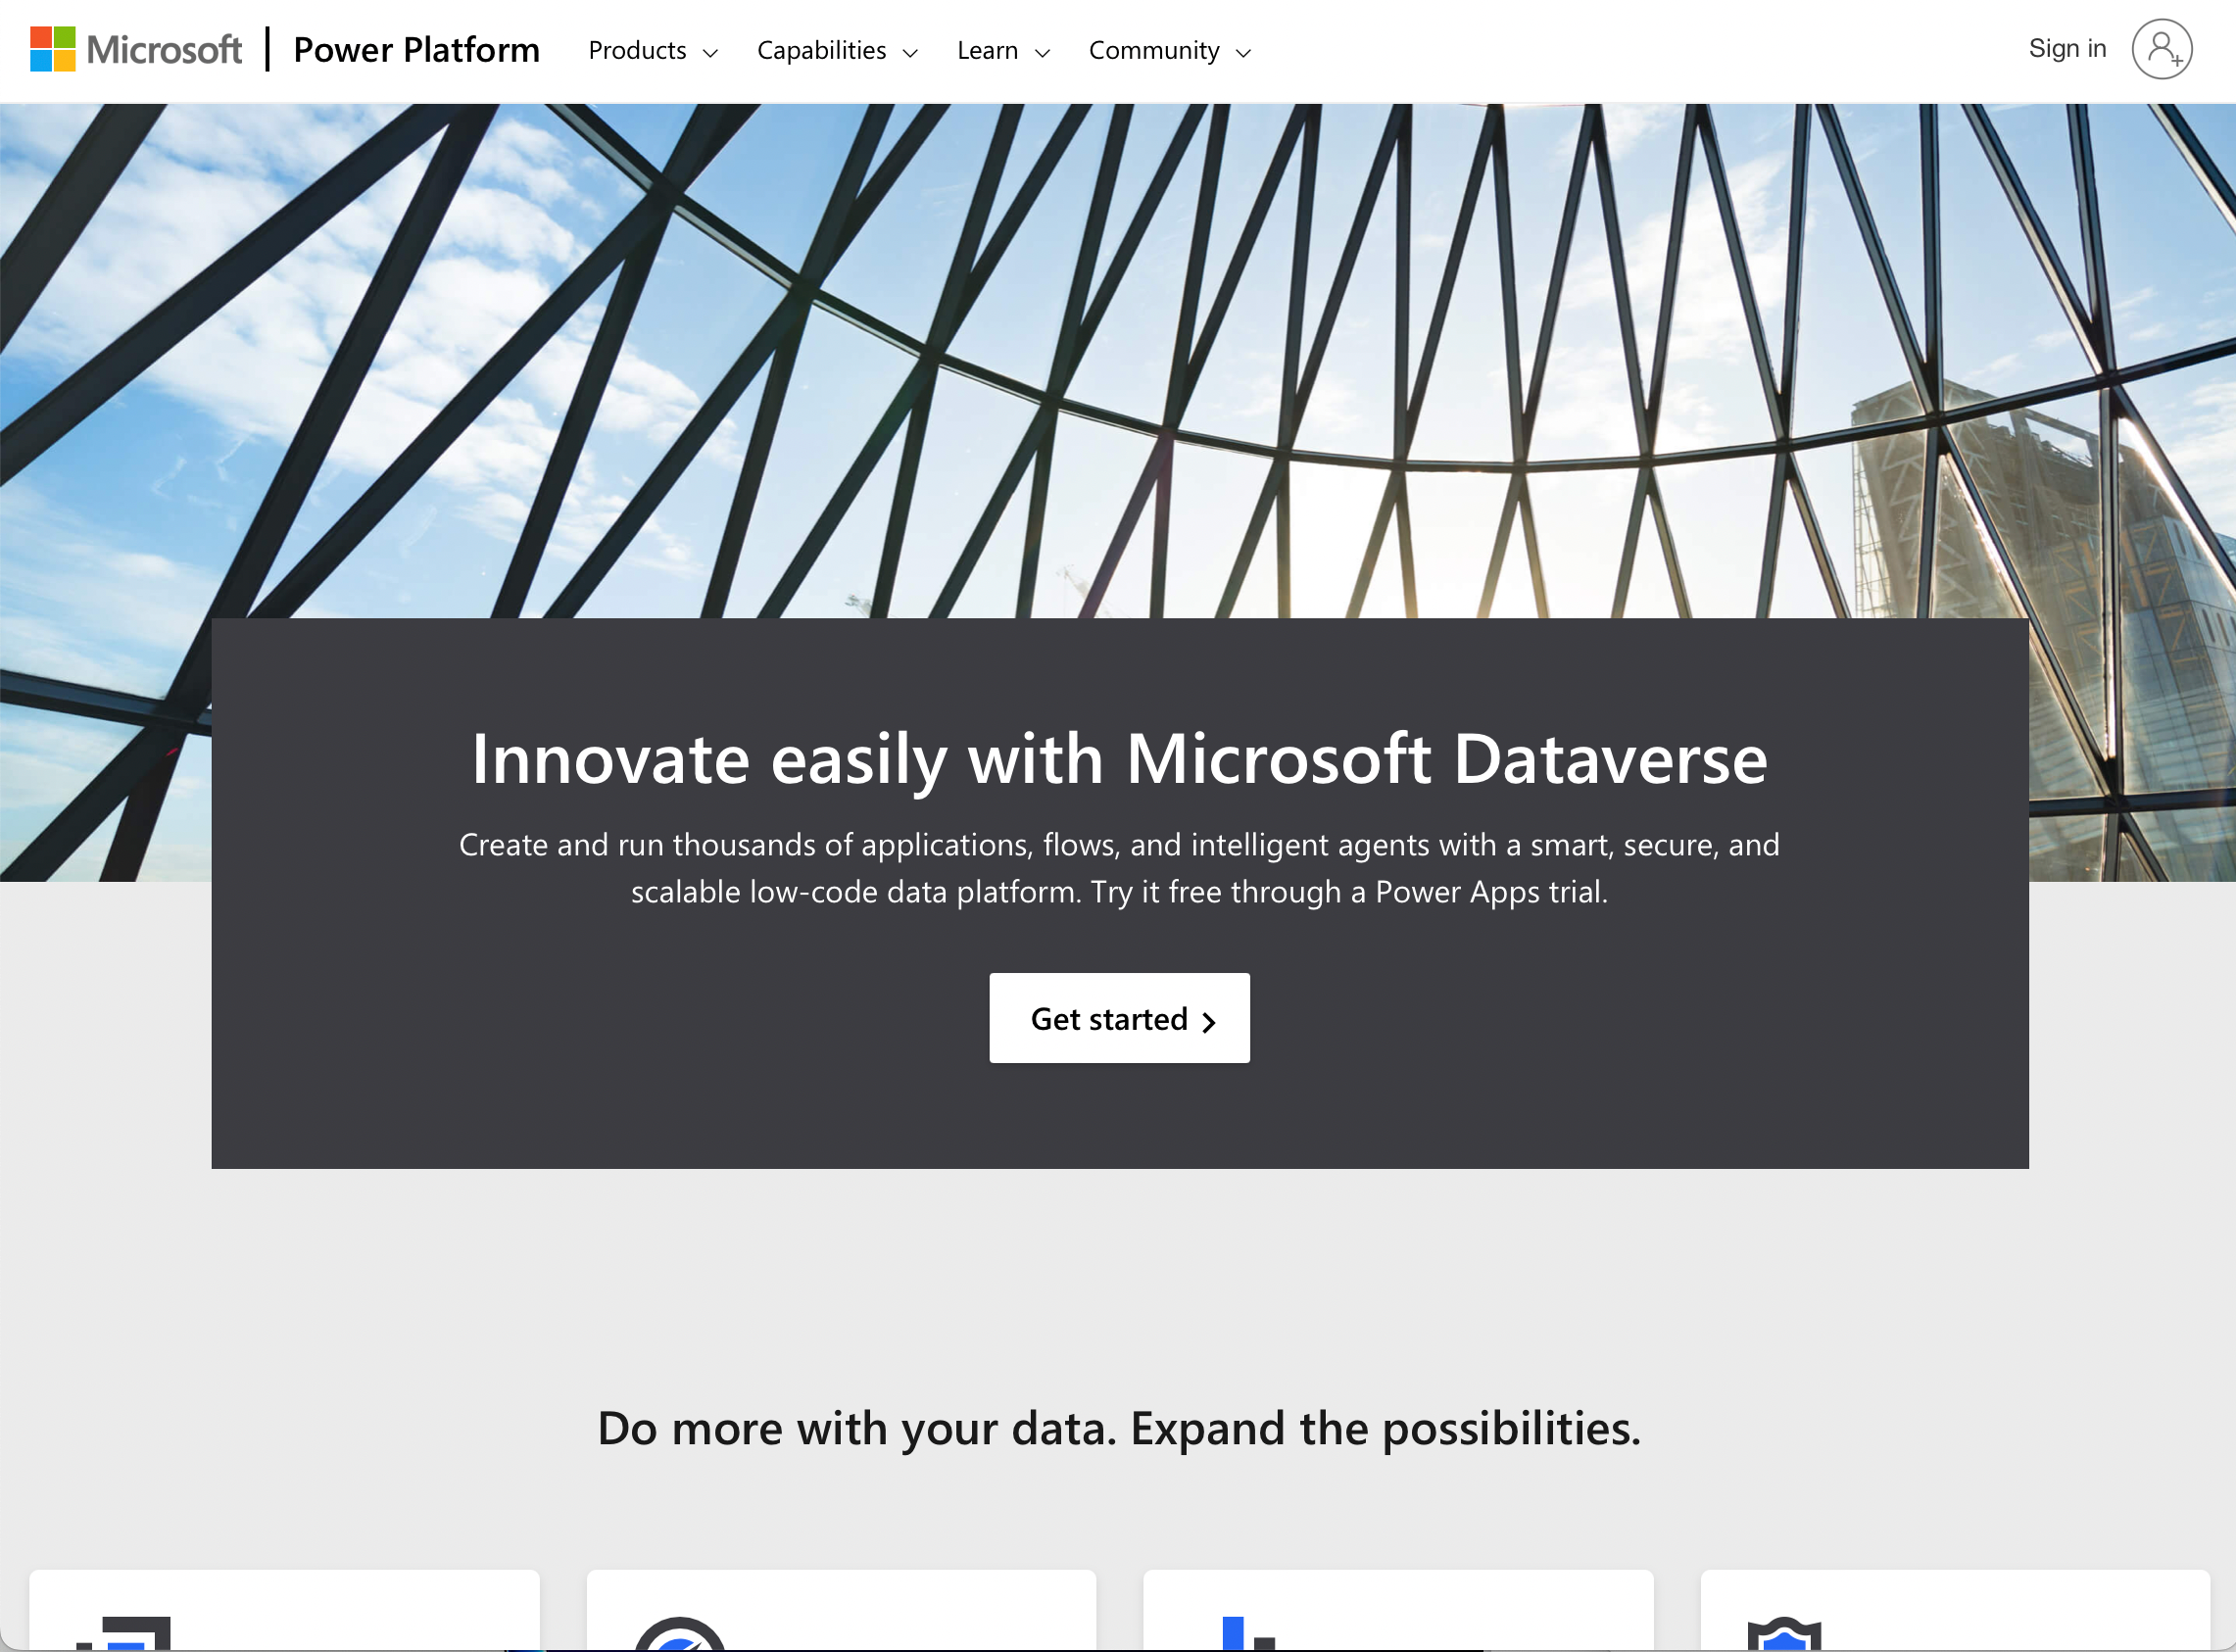 What is Microsoft Dataverse